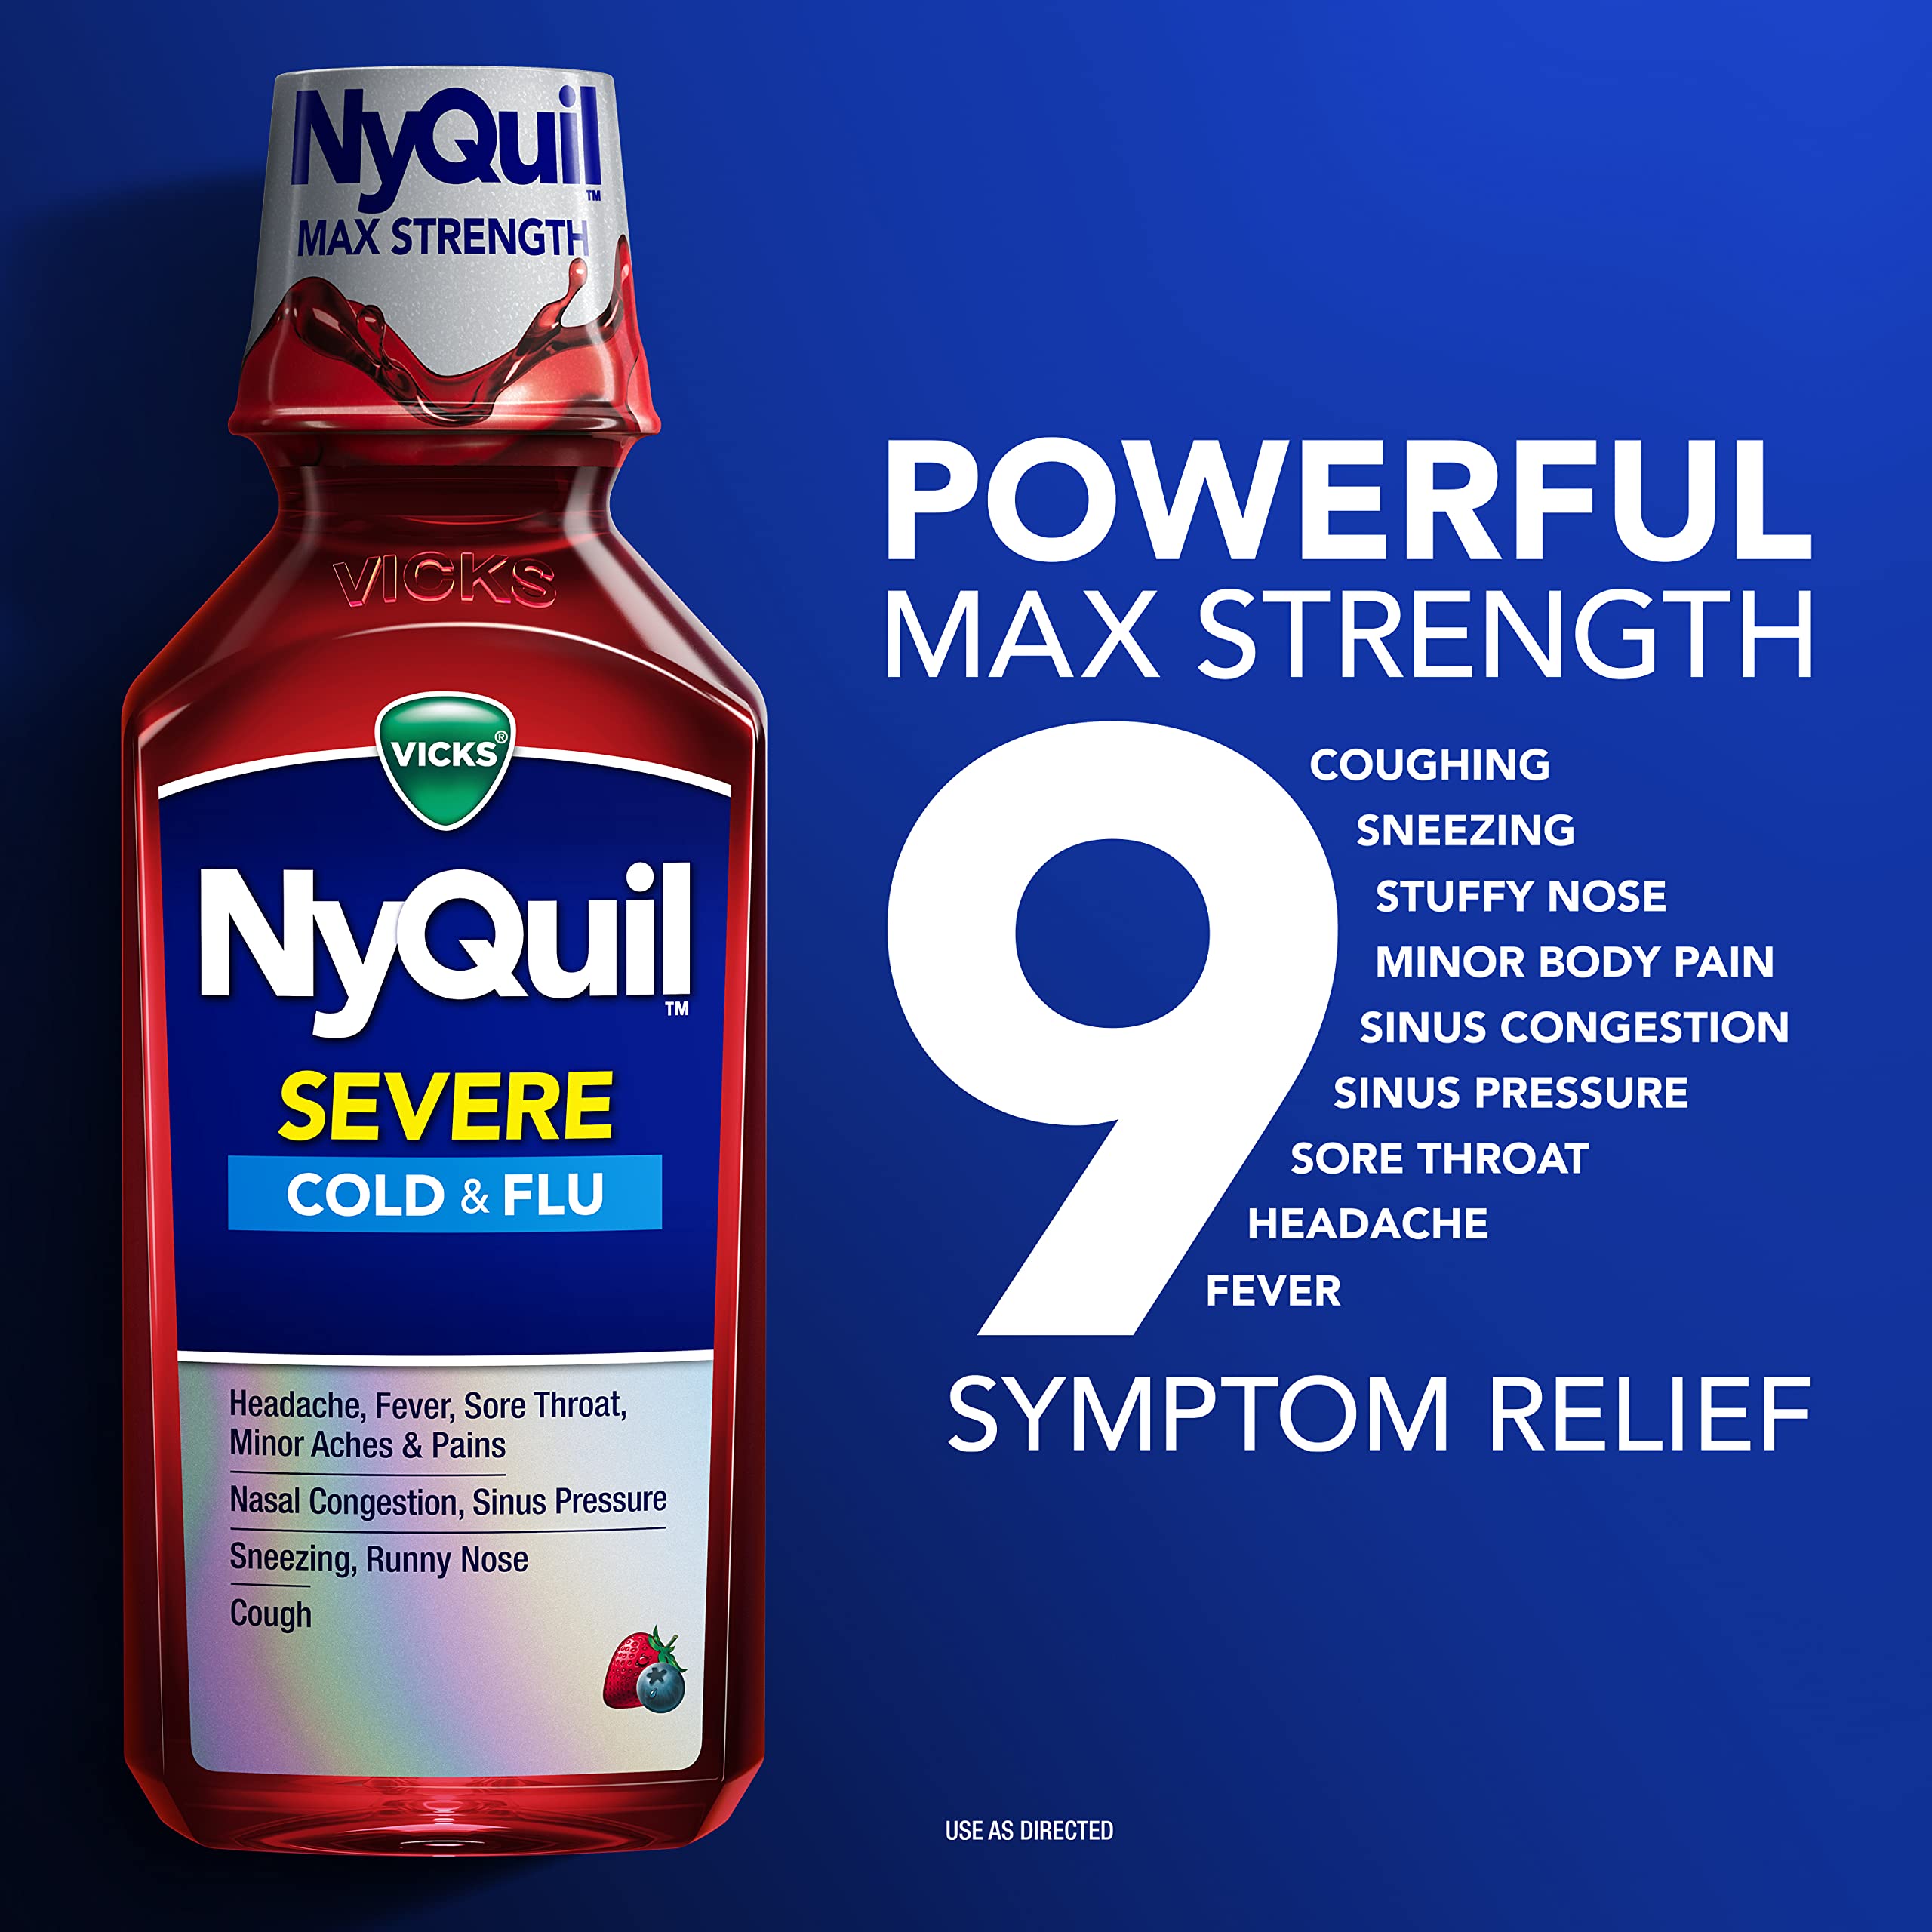 Vicks NyQuil SEVERE Cold & Flu Liquid Berry Flavored Medicine, Max Strength Nighttime Relief for Fever, Sore Throat, Minor Aches And Pains, Nasal Congestion, Sneezing, Cough, Twin Pack, 2 x 12 FL OZ